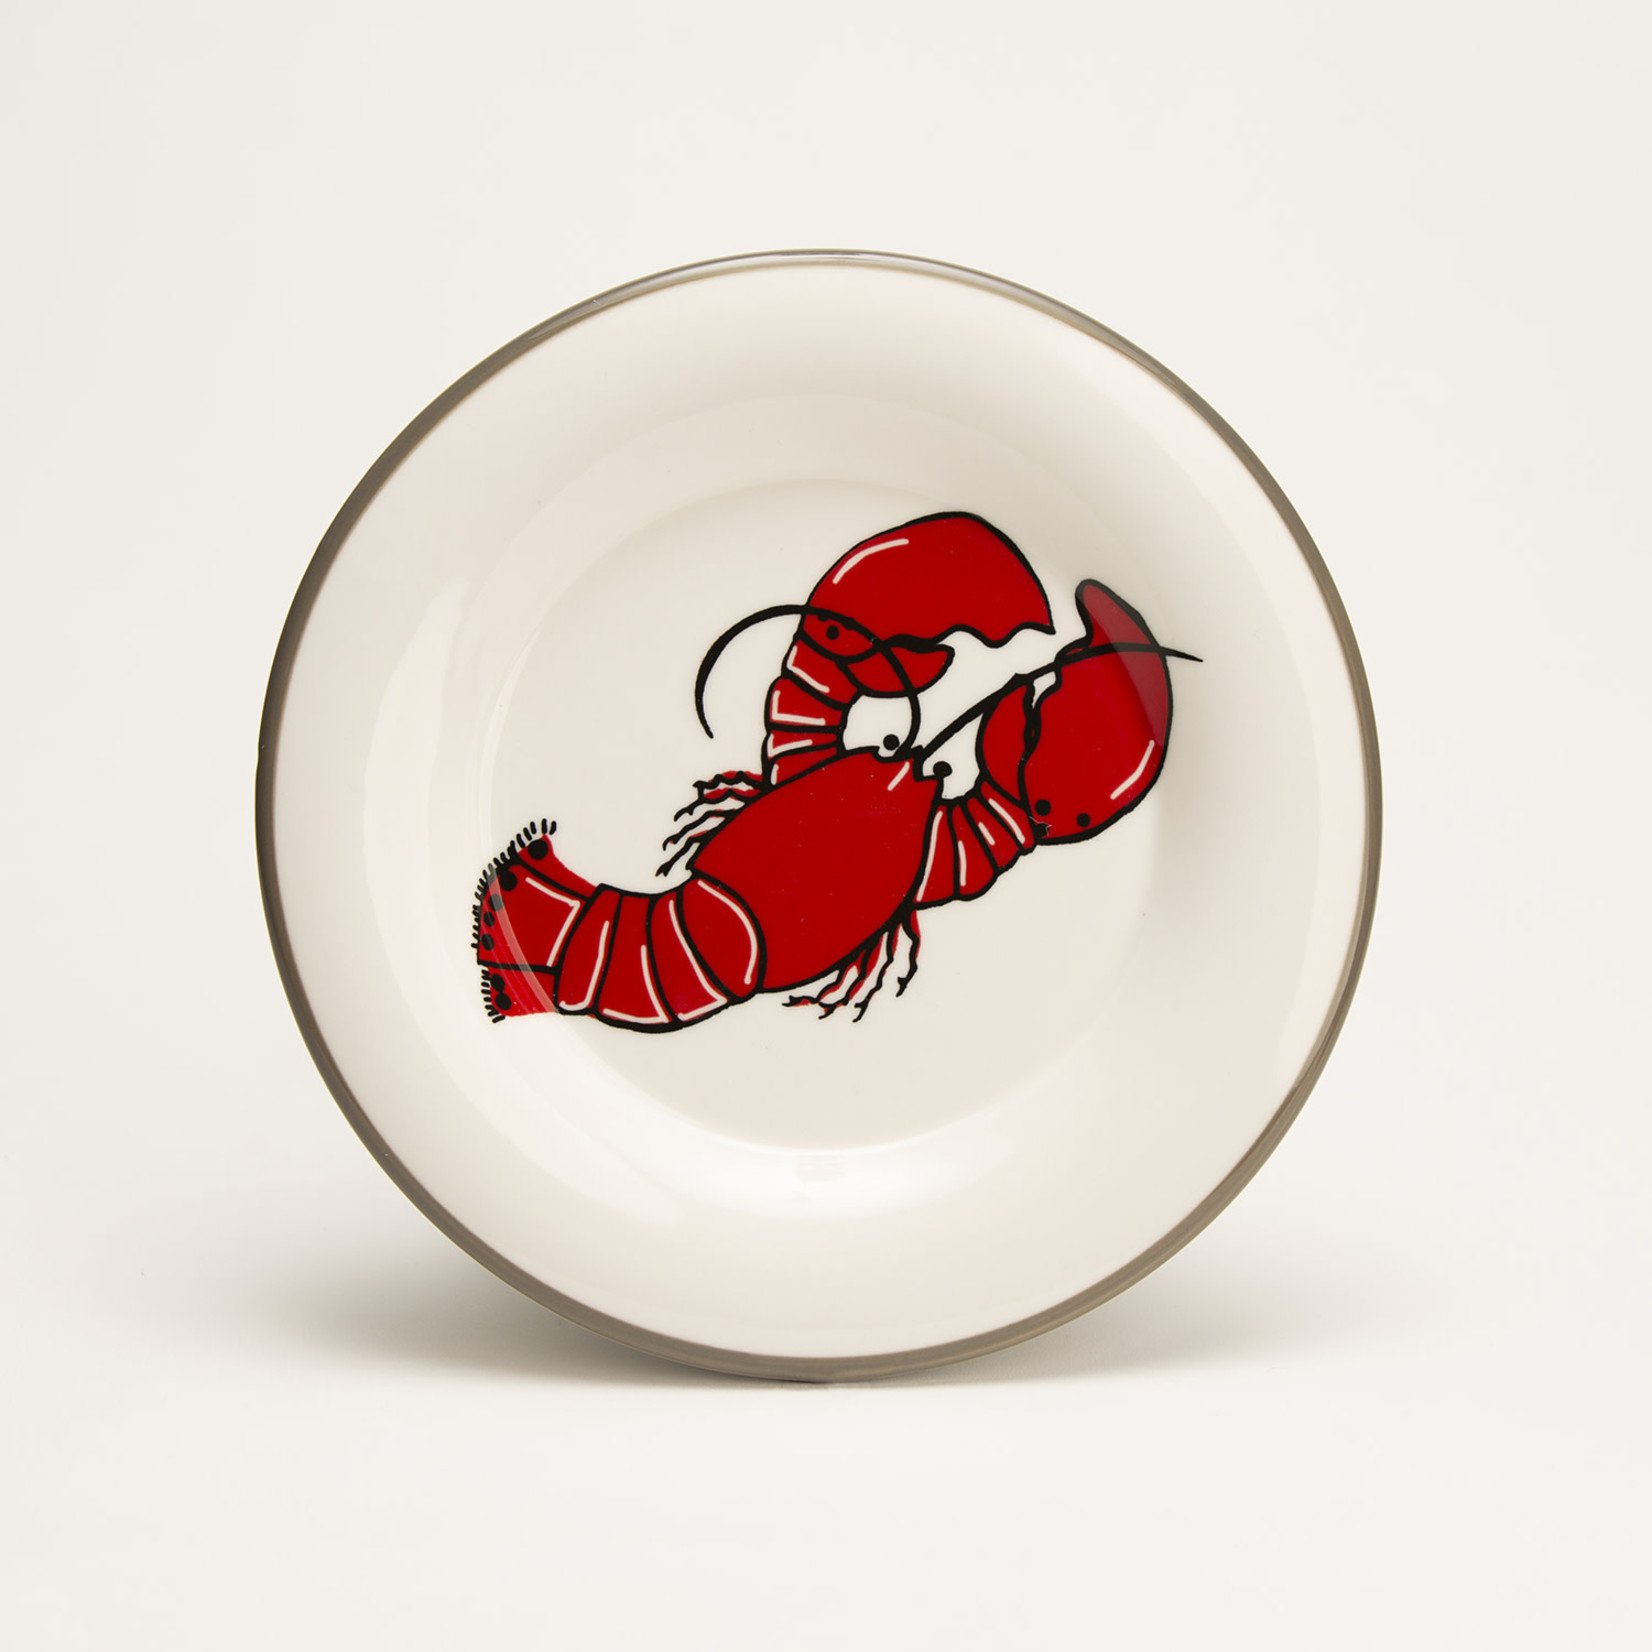 7.5" Round Plate - Lobster